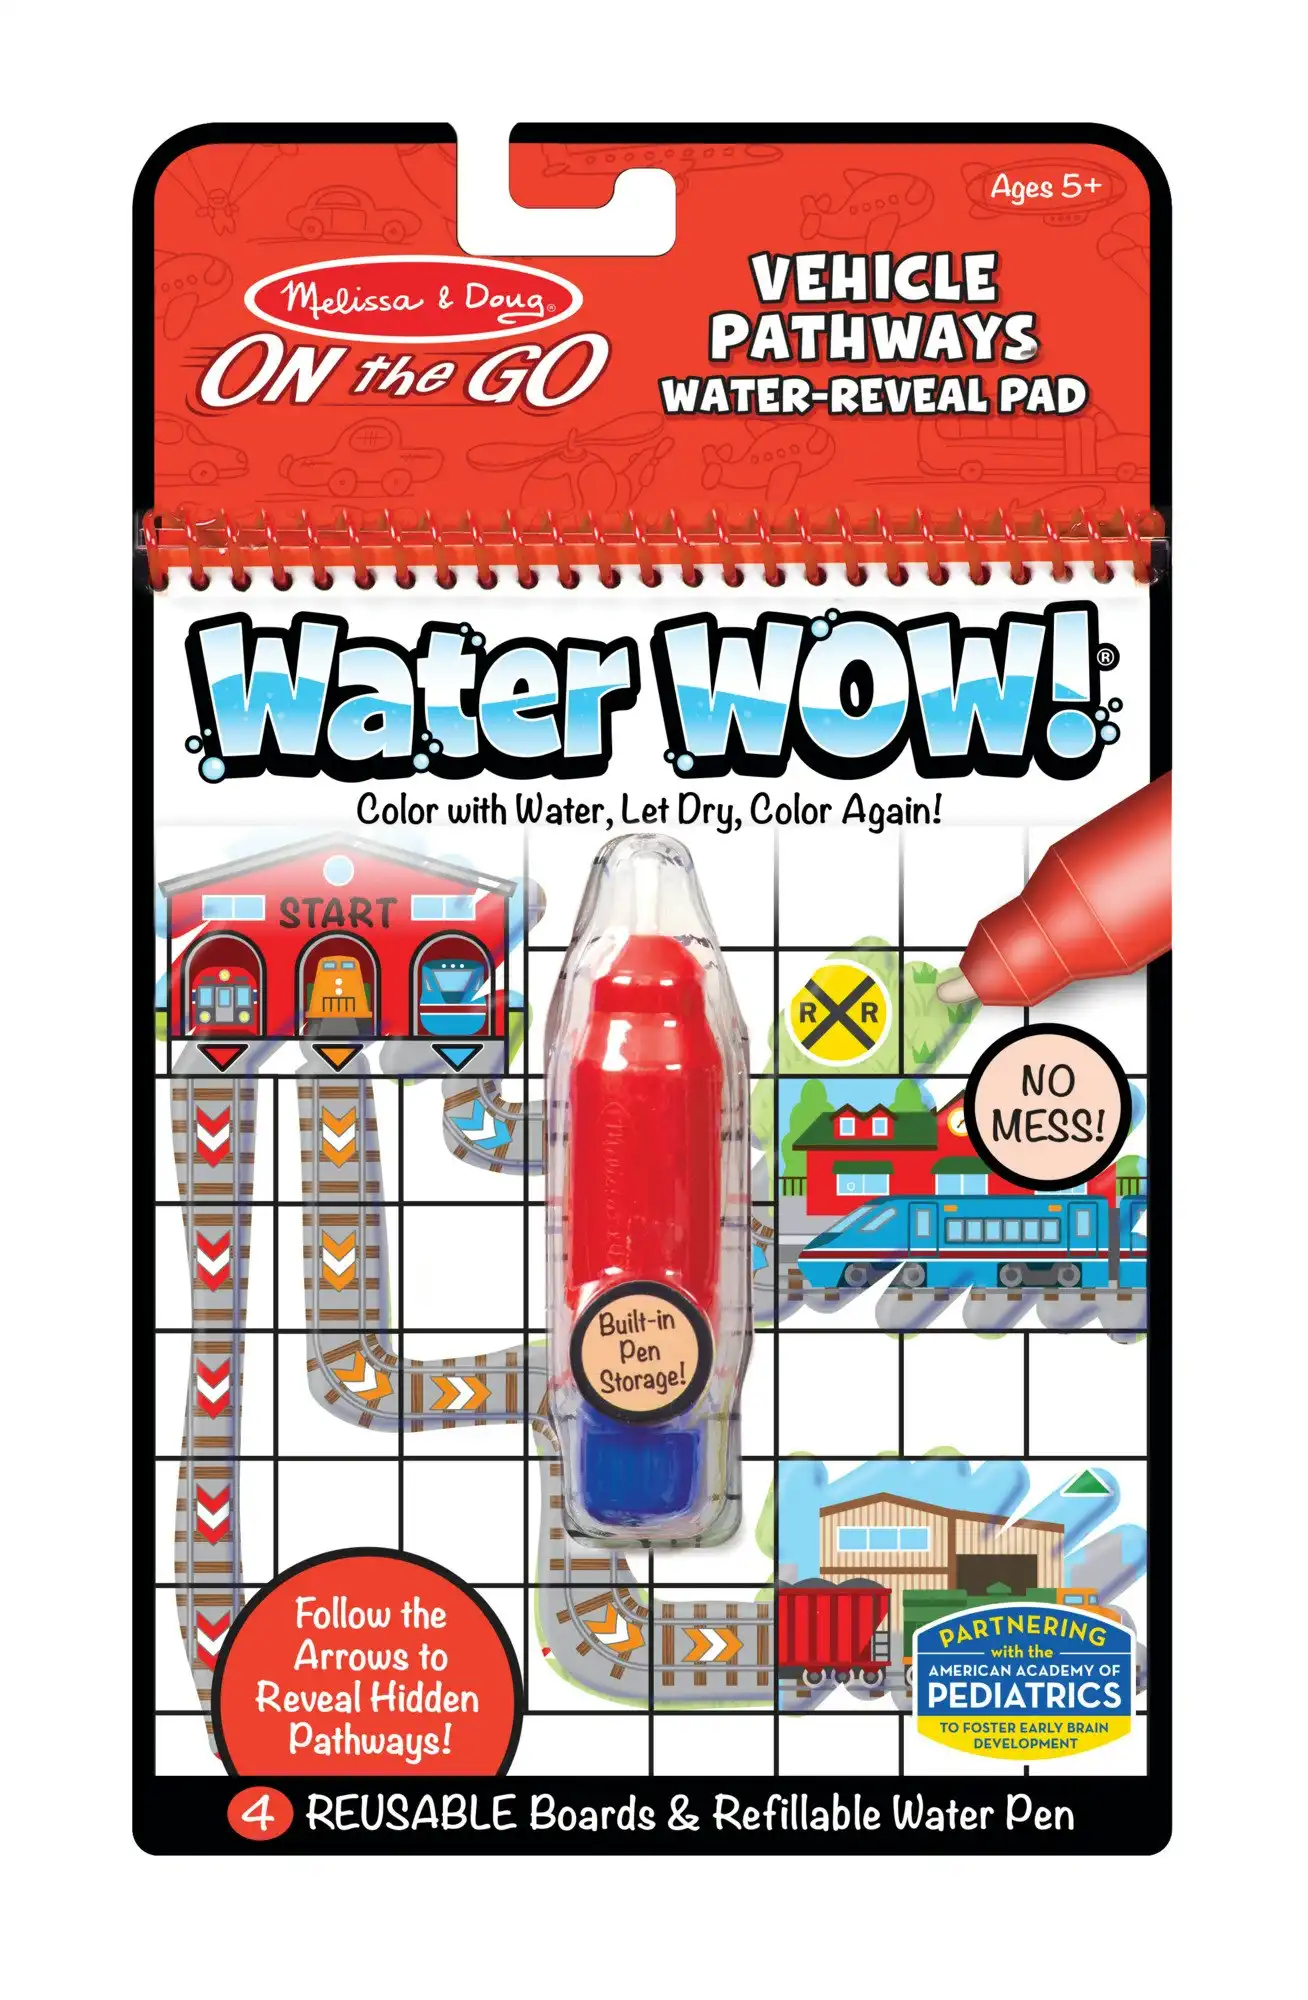 Melissa and Doug - On the Go Water Wow! Vehicle Pathway